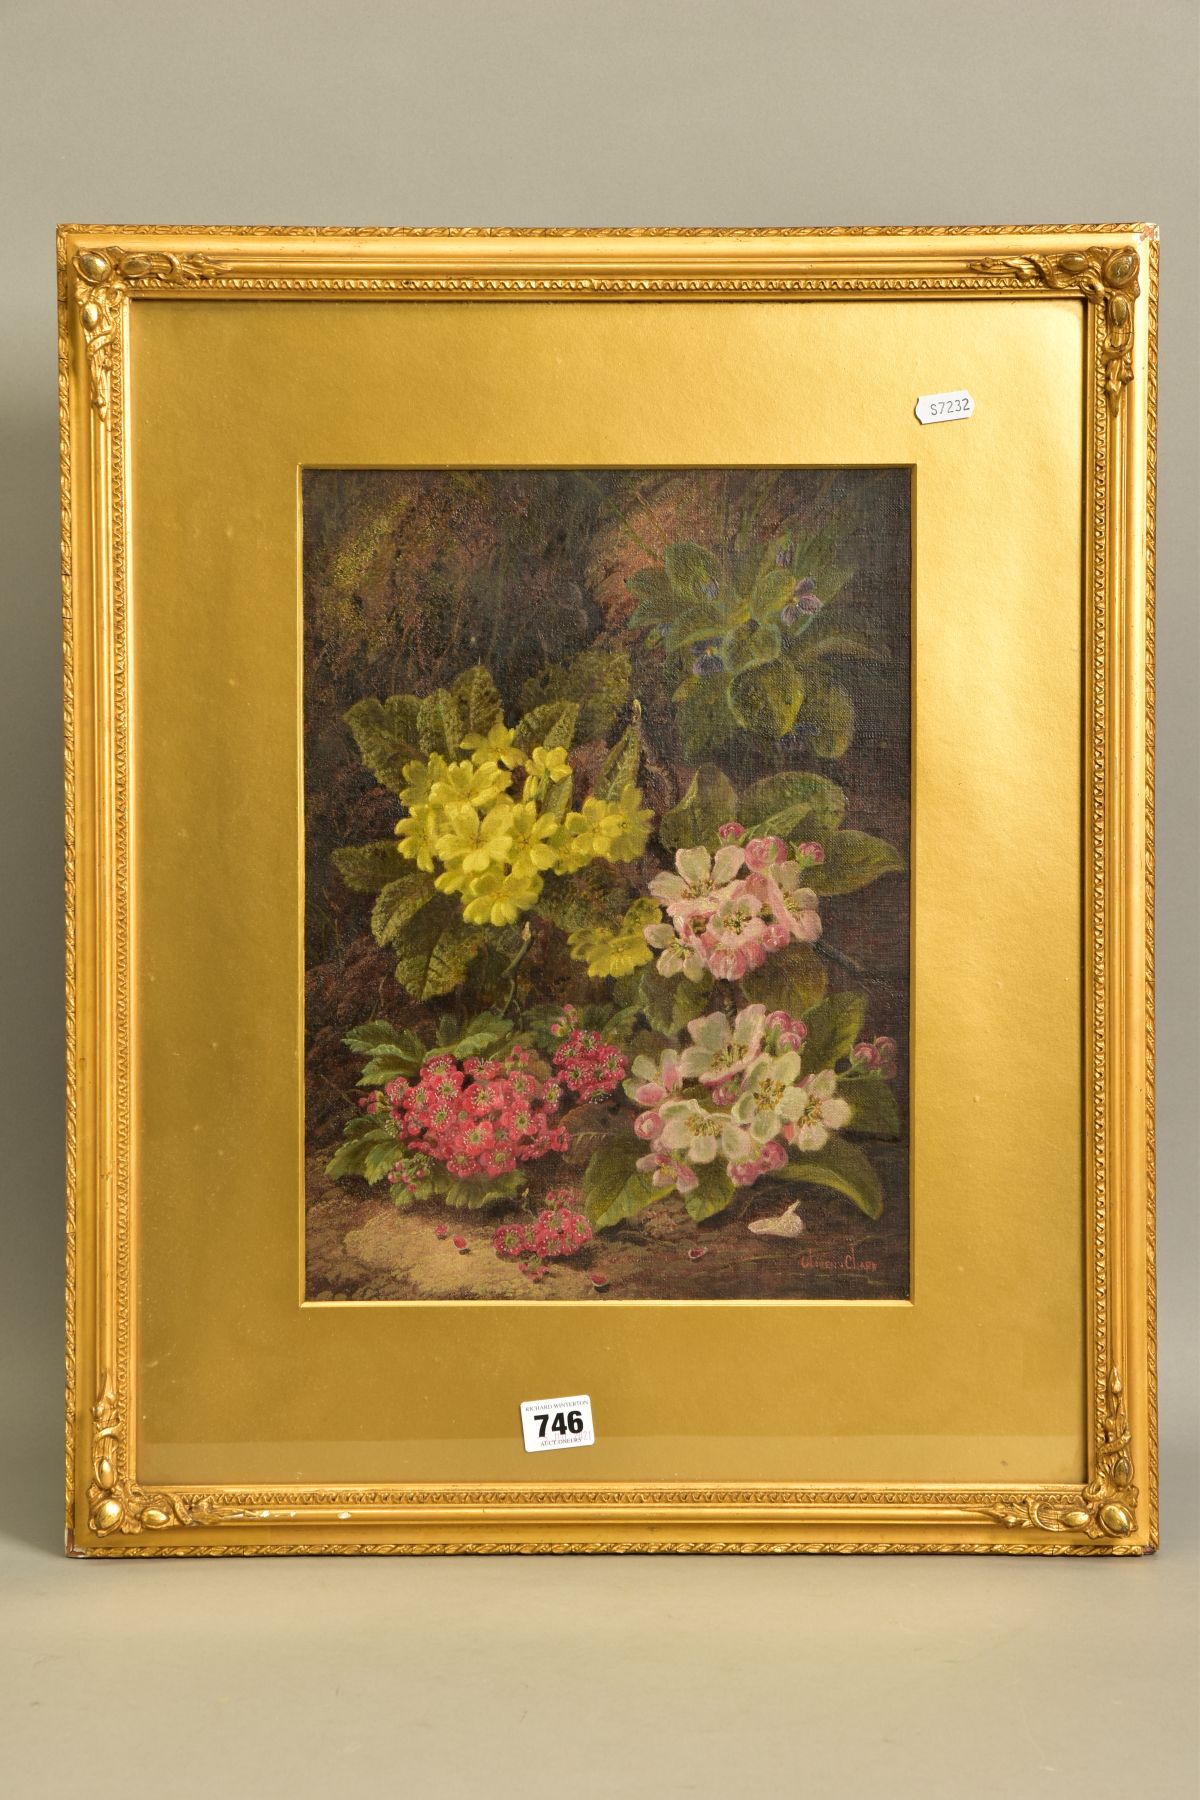 OLIVER CLARE (1852-1927), WILD FLOWERS AGAINST A MOSSY BANK, signed bottom right, oil on board?,